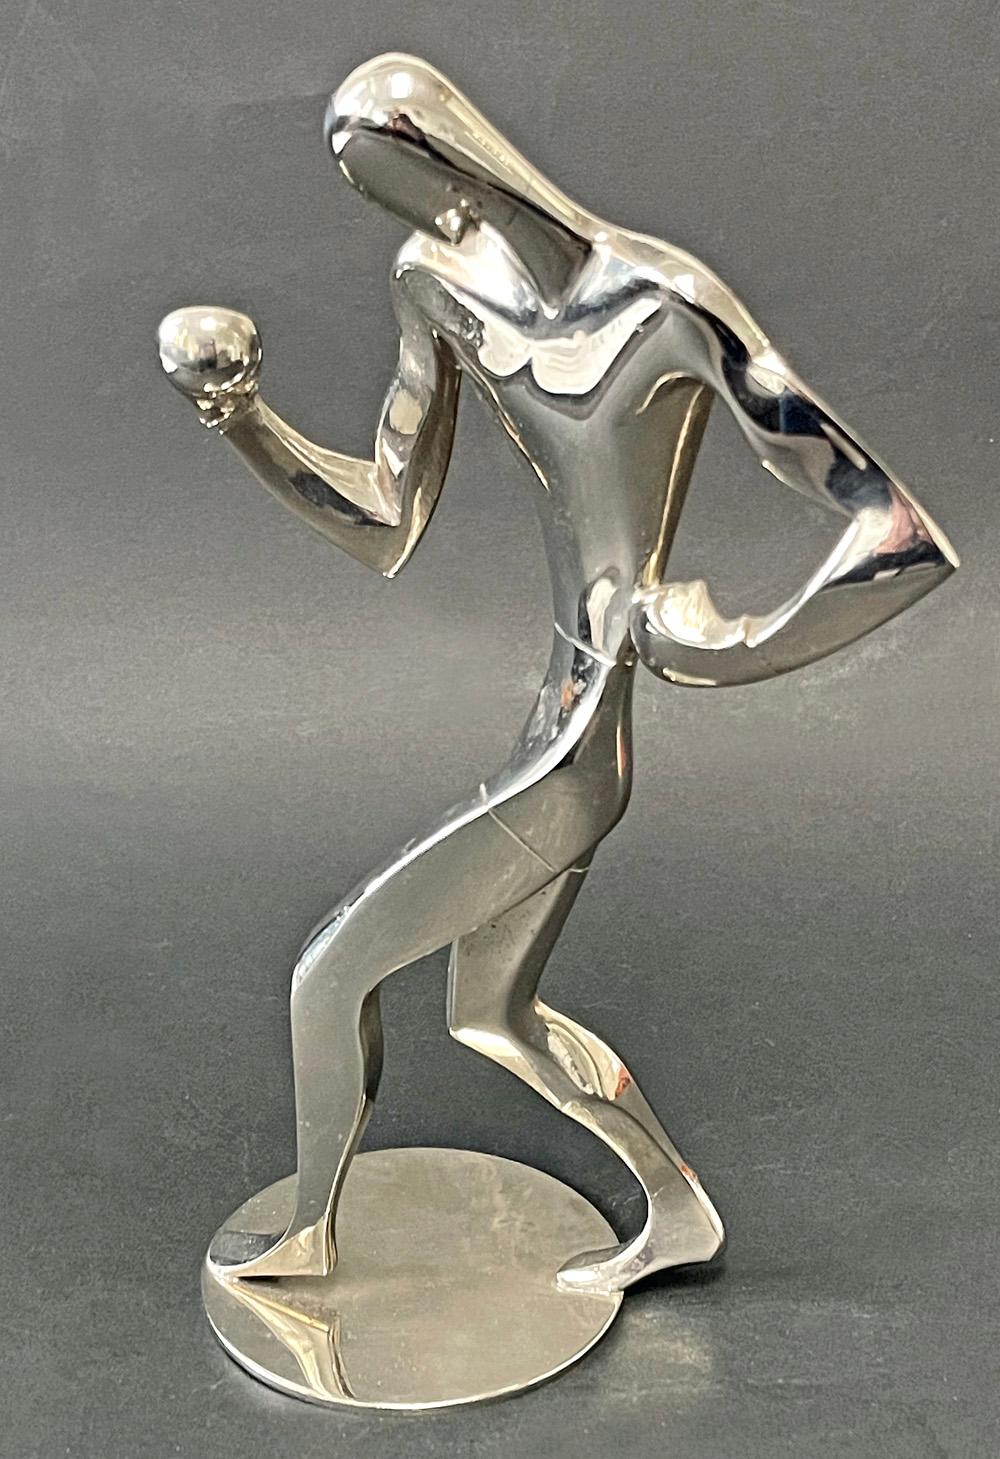 Sculpted by one of the greatest innovators in Art Deco sculpture in 1930s Europe, this nickeled brass figure of a boxer, his right arm reaching out to jab at his opponent, was made by the Hagenauer firm in Vienna. Hagenauer made an enormous array of